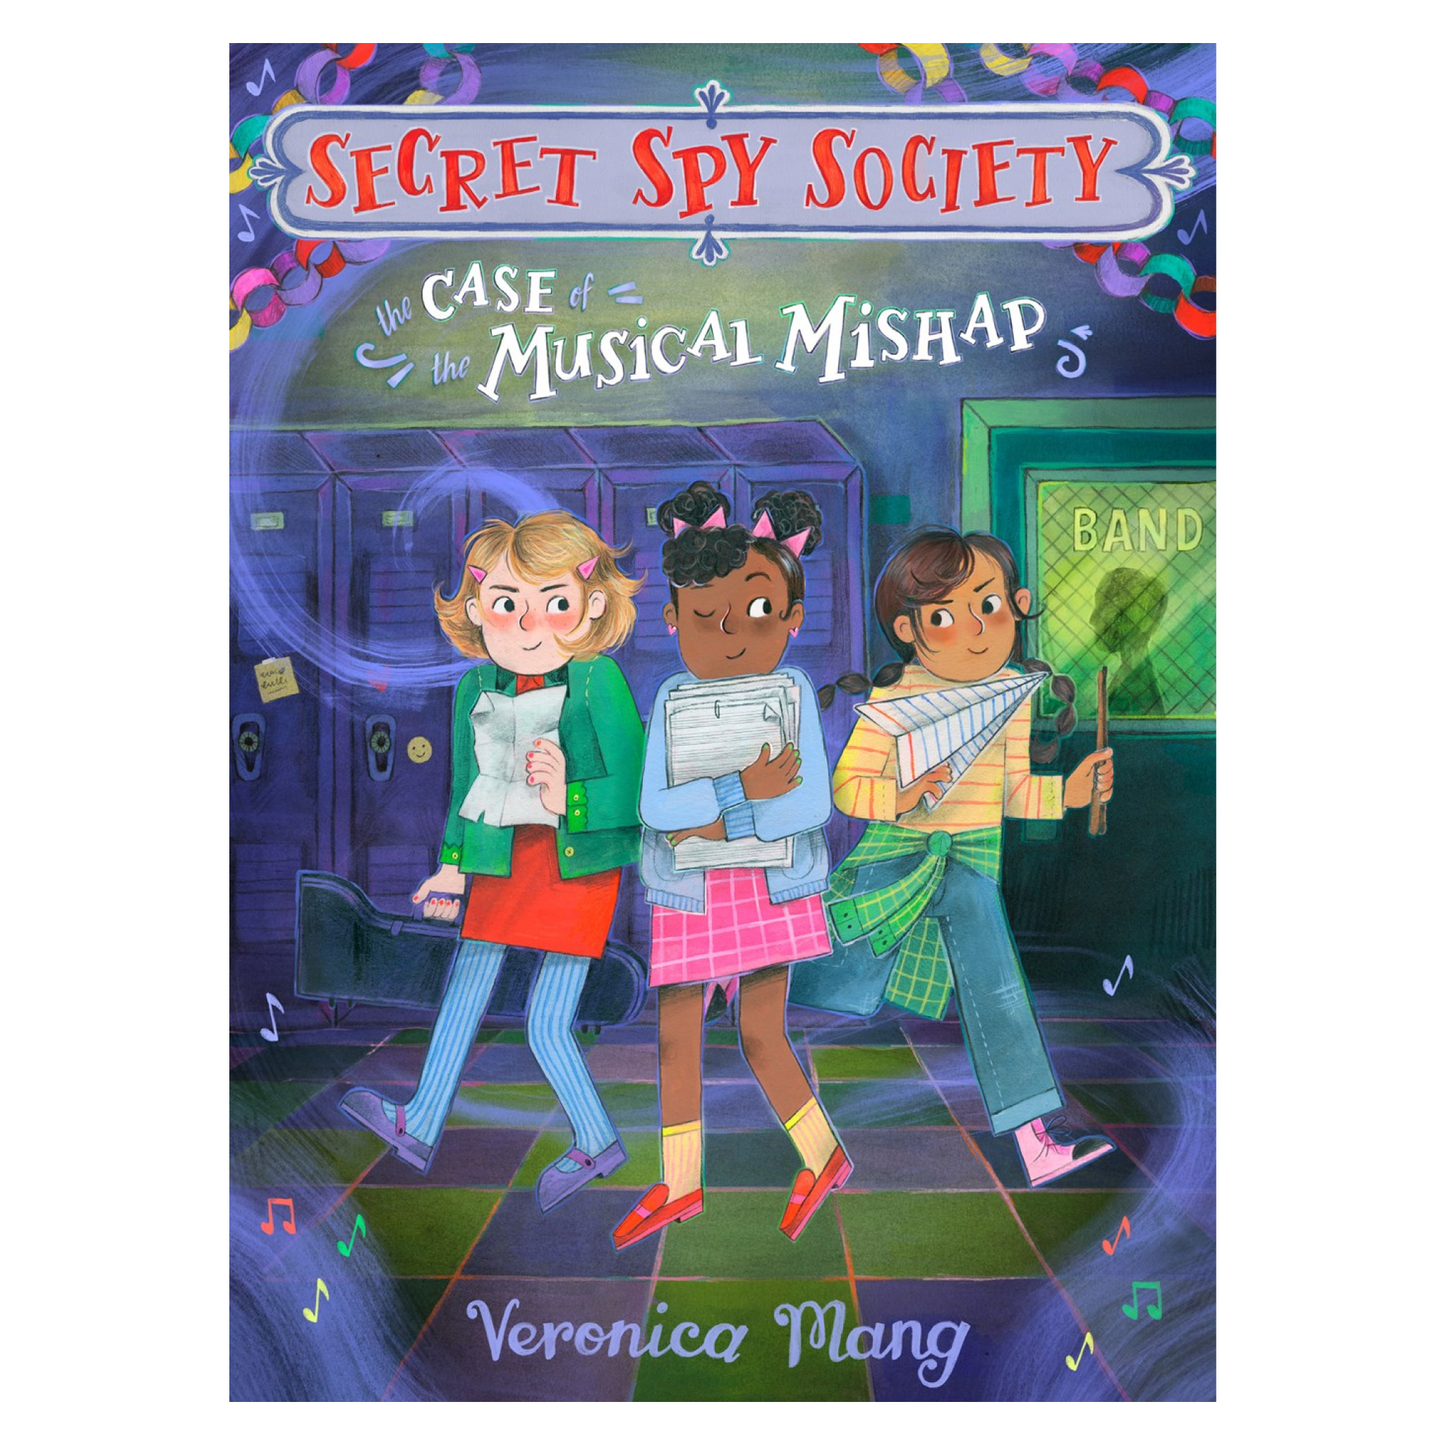 Secret Spy Society: The Case of the Musical Mishap